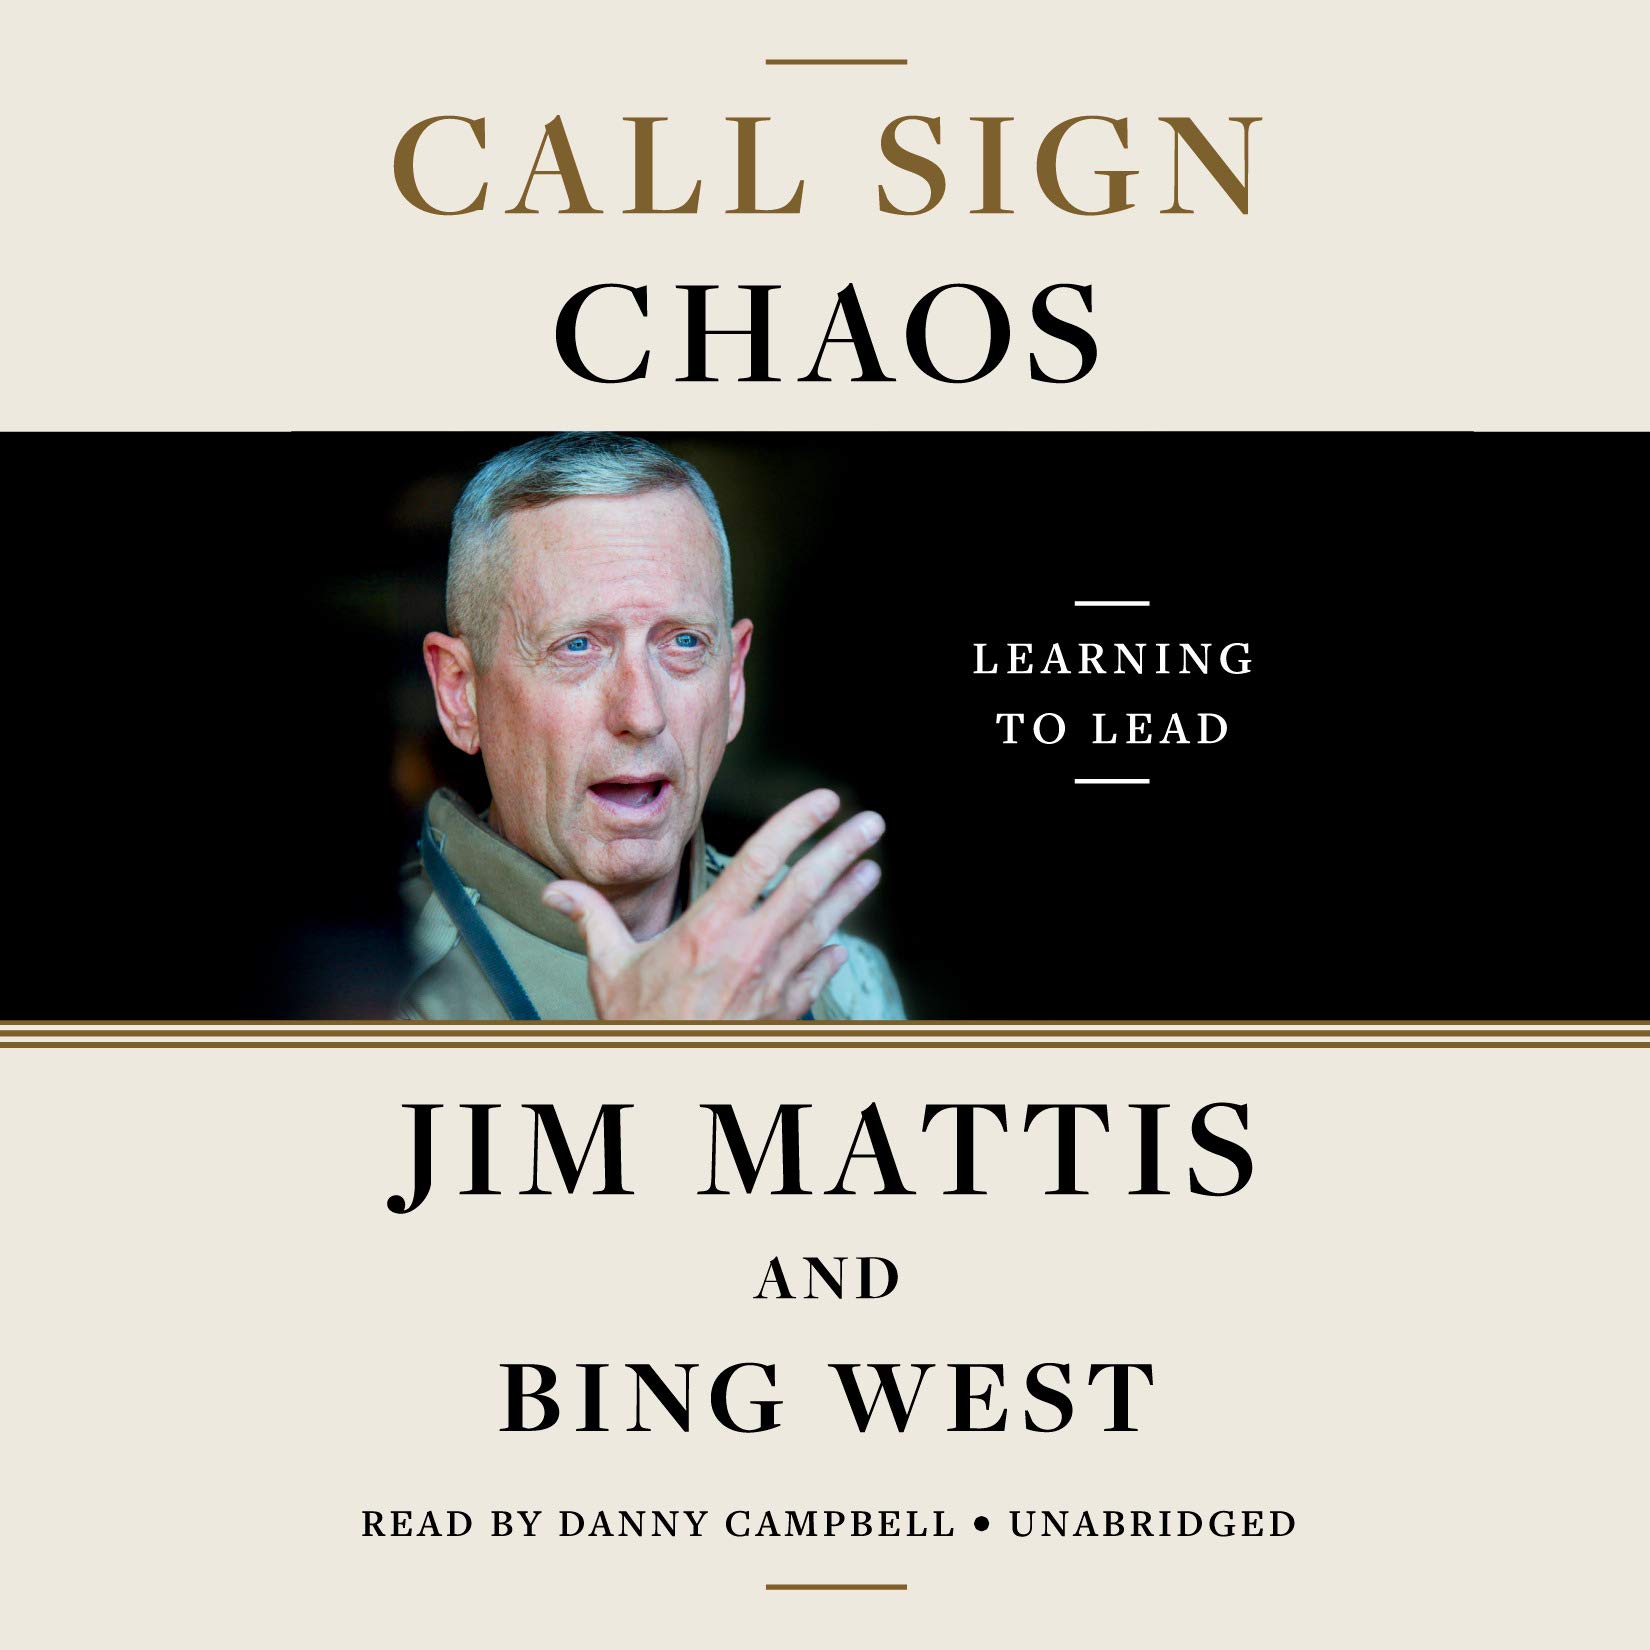 Cover image of the book 'Call Sign Chaos,' by Jim Mattis and Bing West